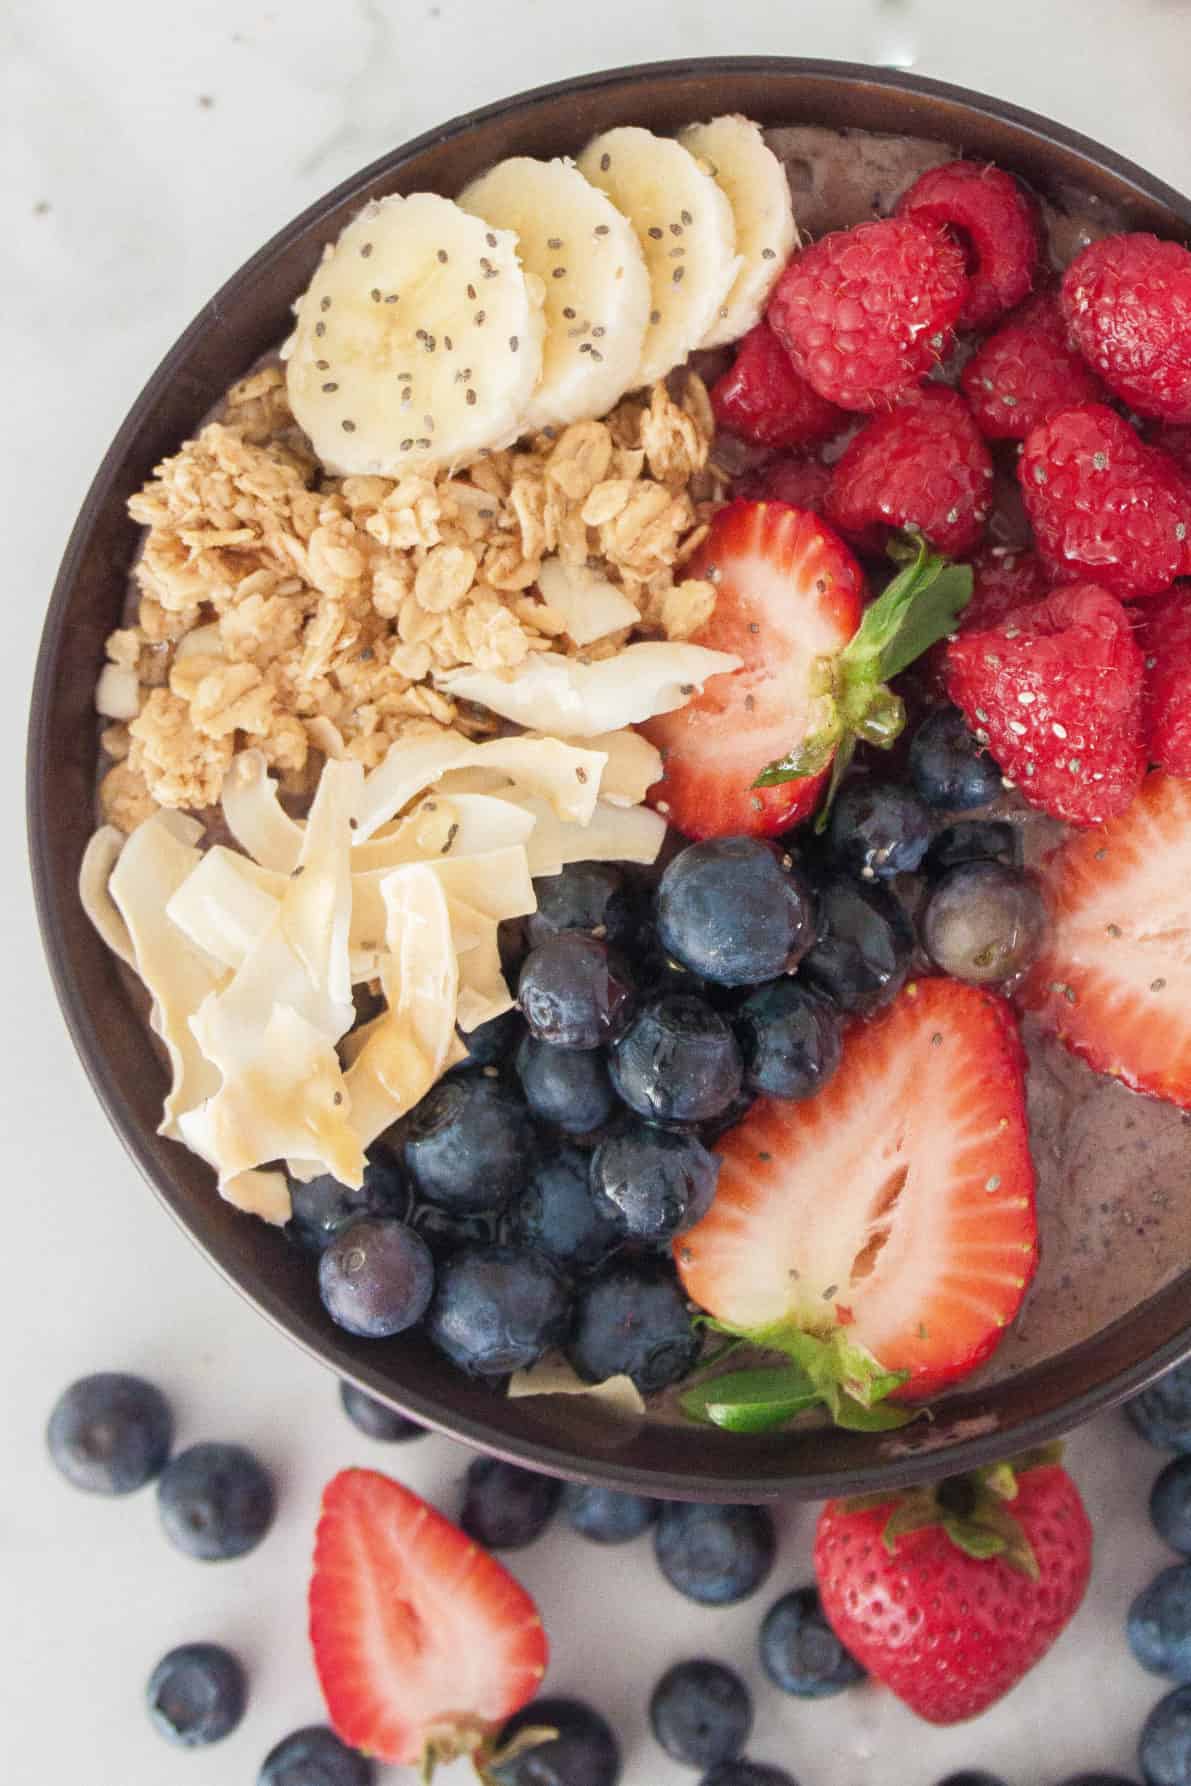 Homemade Hawaiian Acai Bowl topped with fresh berries and other tasty toppings.